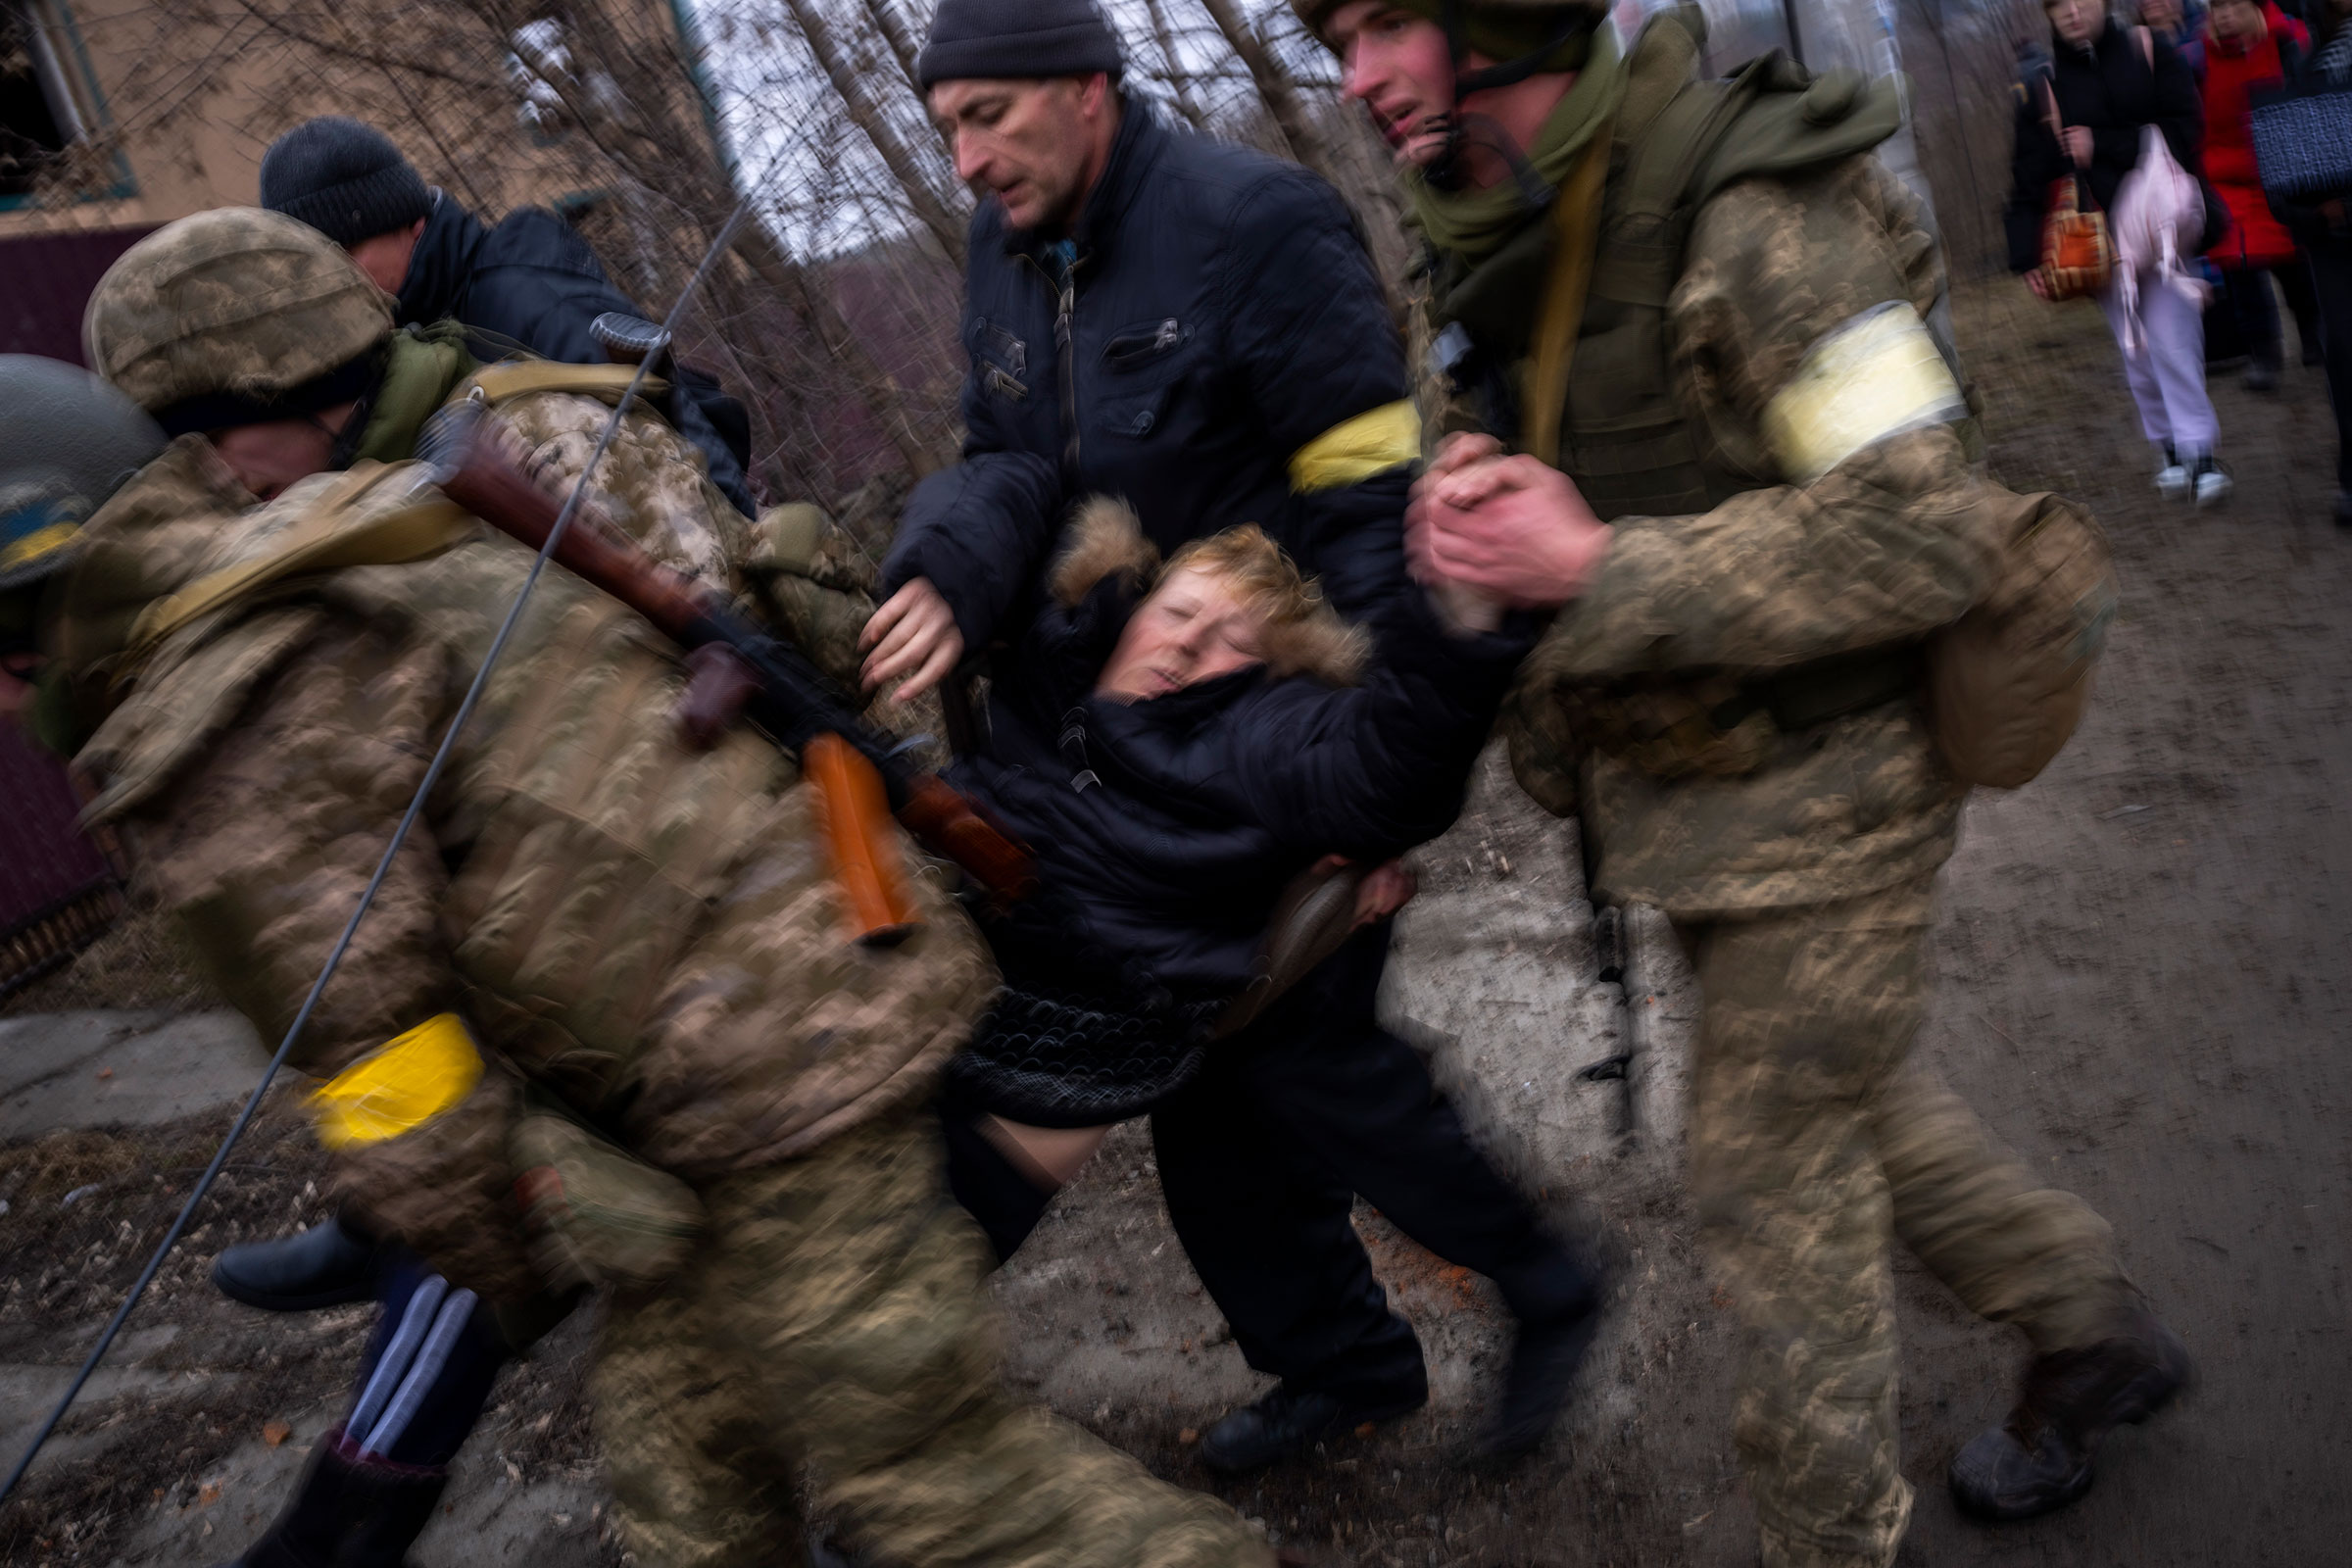 A sick woman in a semi-conscious state is carried by Ukrainian soldiers as they cross the Irpin river while fleeing the city in the outskirts of Kyiv on March 5. (Emilio Morenatti—AP)